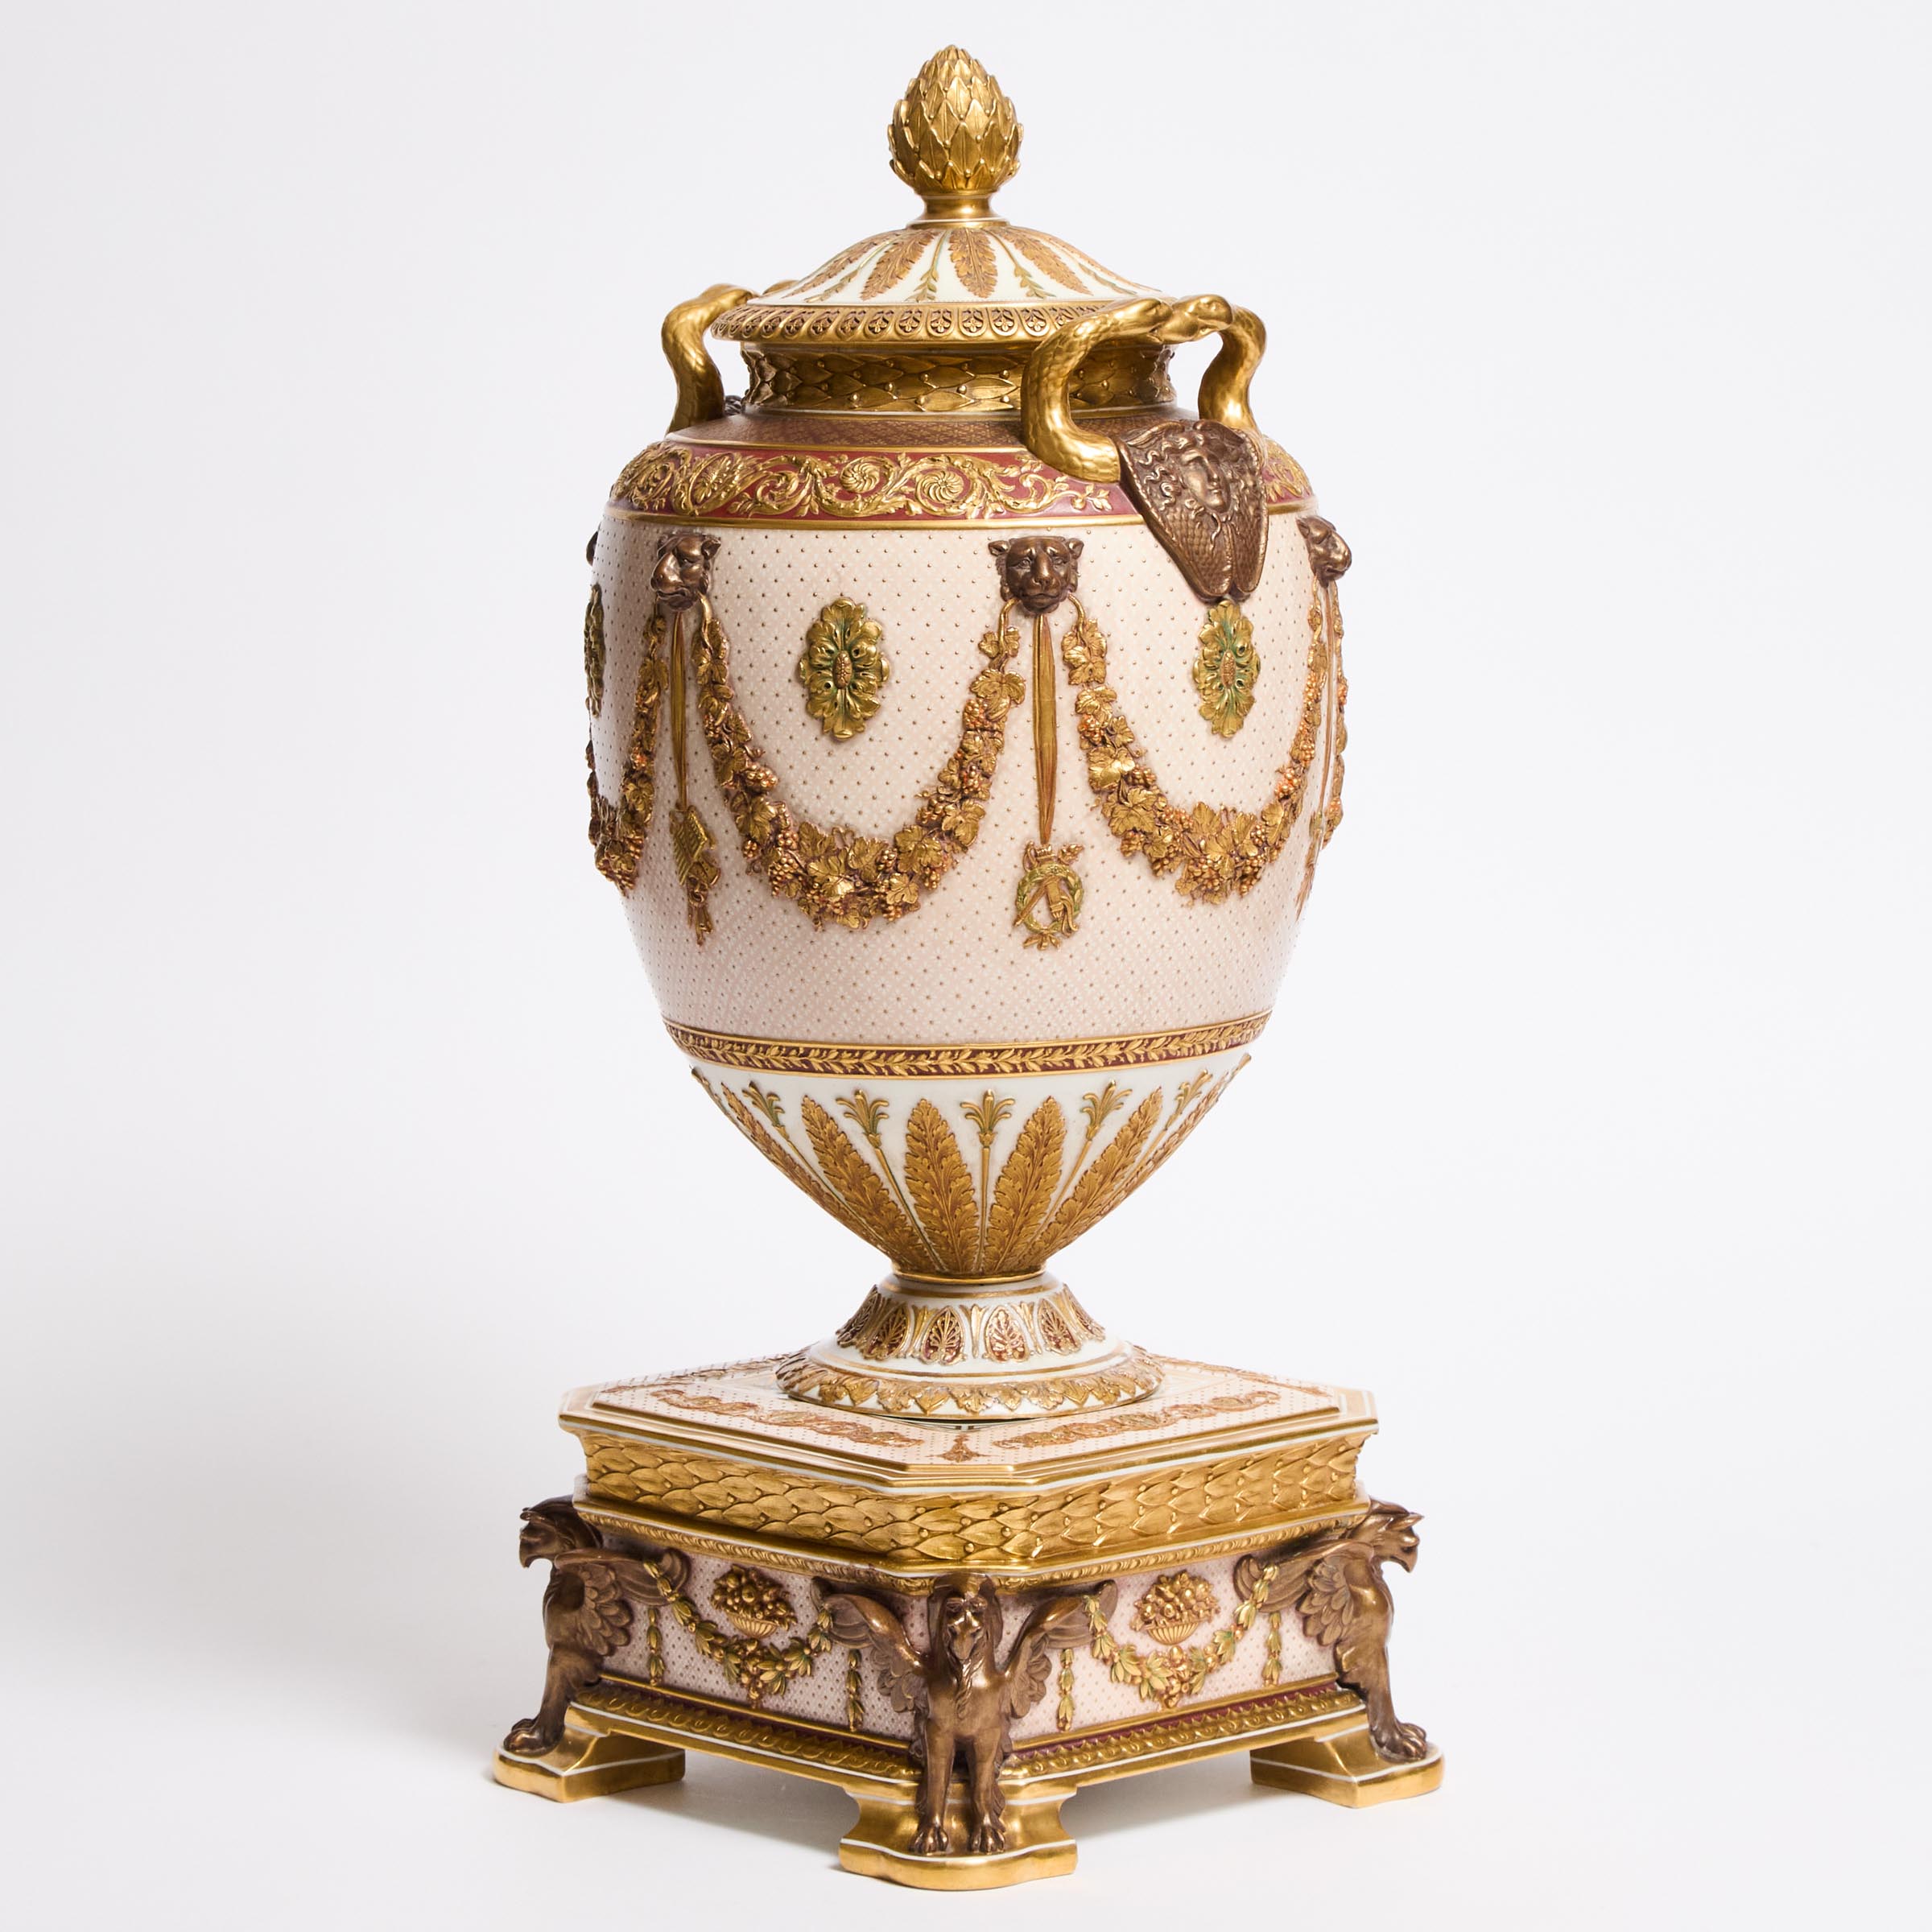 Wedgwood Bronzed and Gilt Victoria Ware Large Covered Urn, c.1900